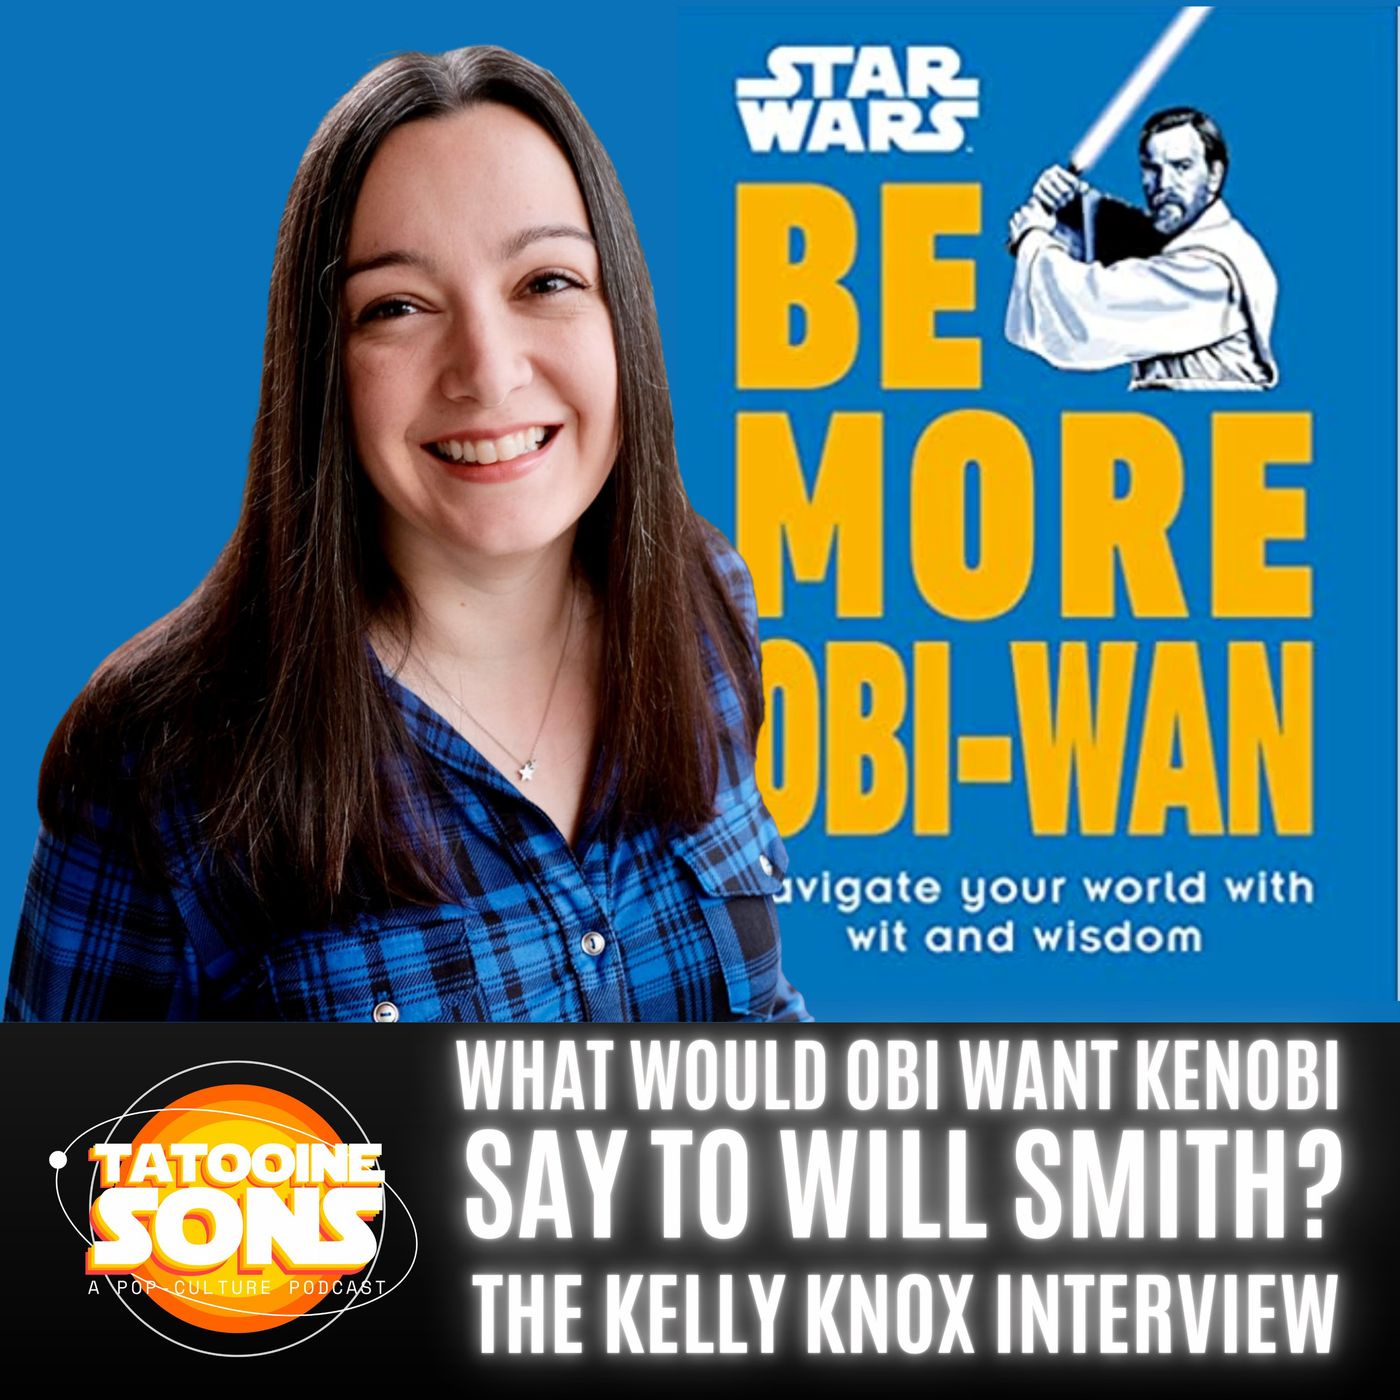 What Would Obi Wan Kenobi Say to Will Smith? The Kelly Knox Interview